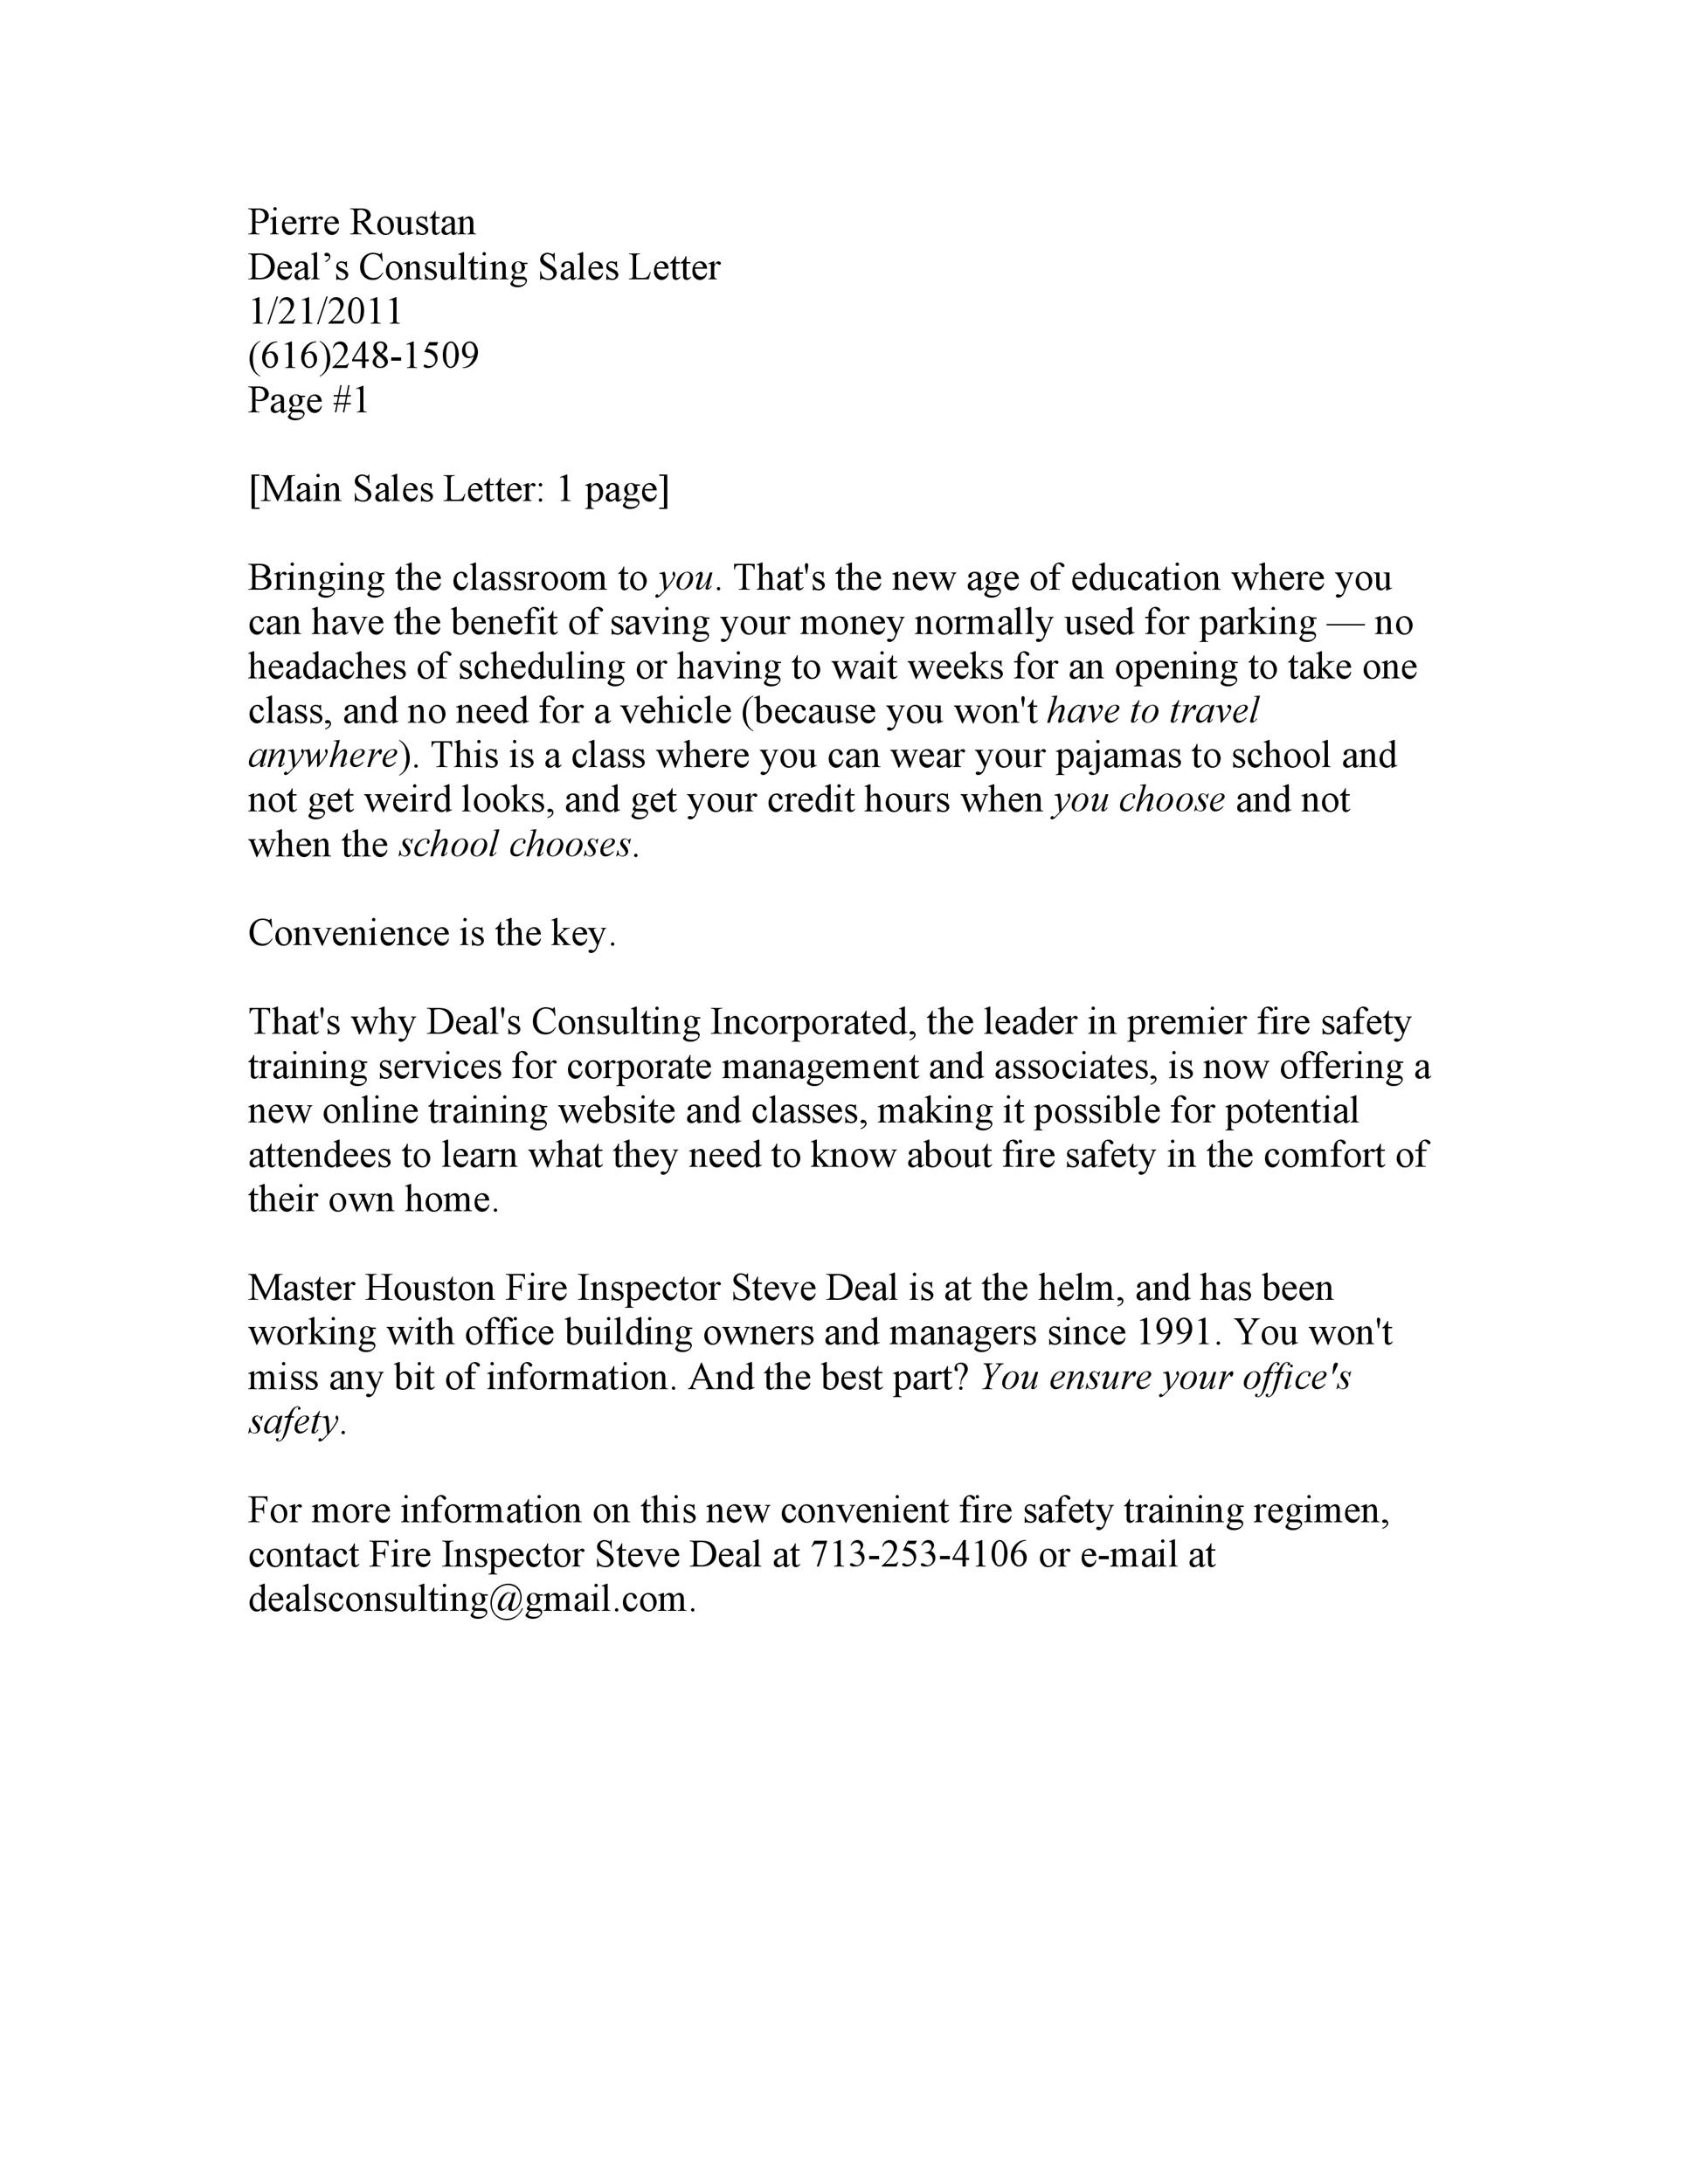 Letter To Seller Template from templatelab.com